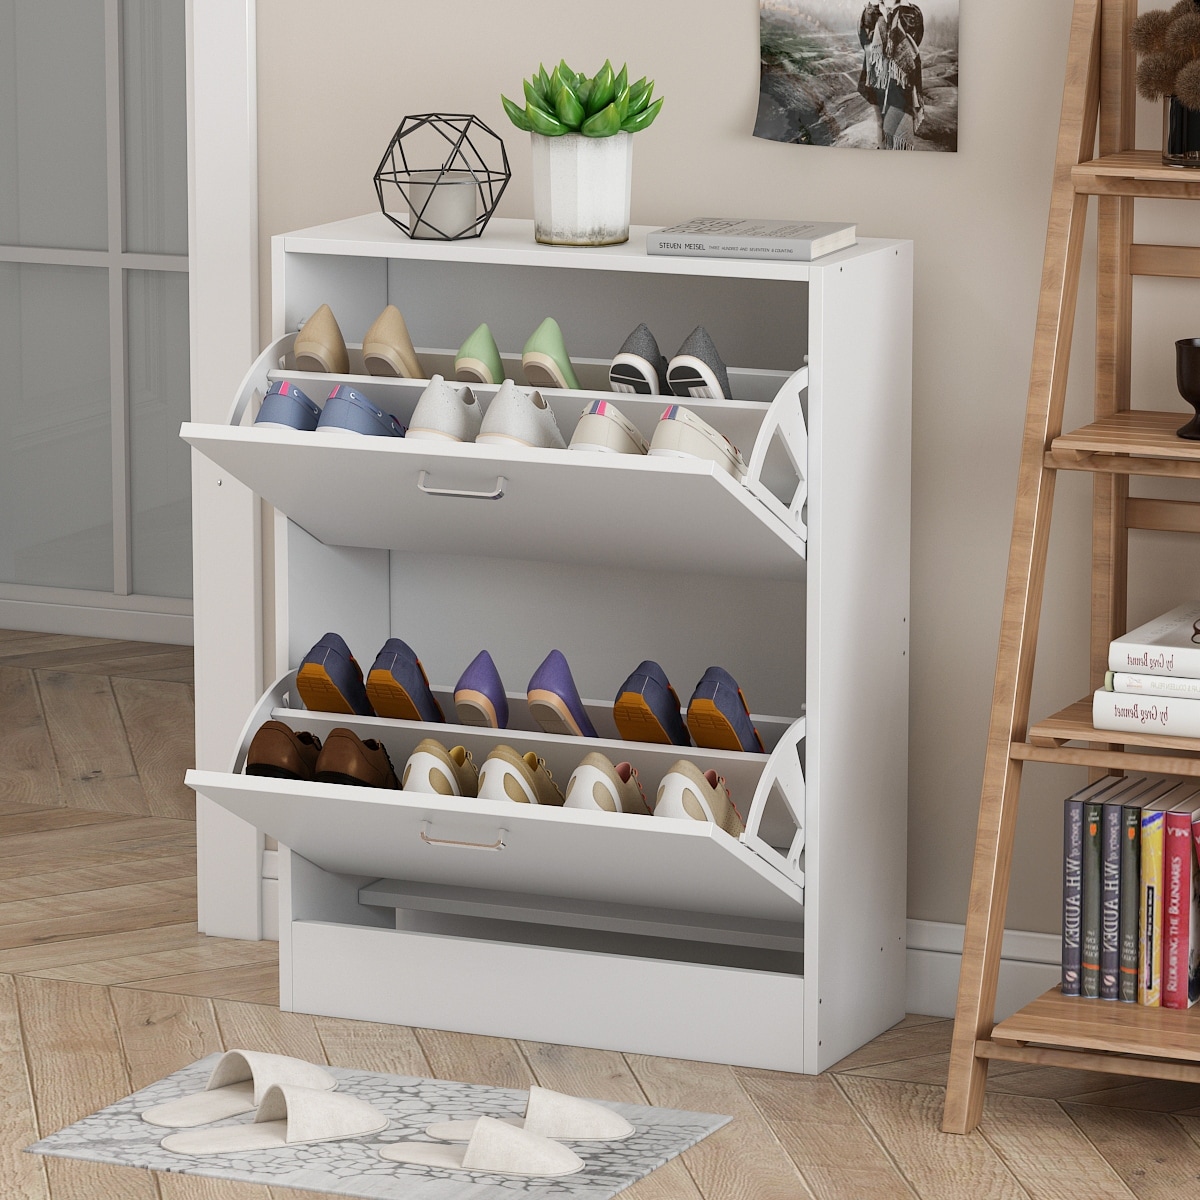 https://ak1.ostkcdn.com/images/products/is/images/direct/9a0b189dc4f72eccd9495938a6c3bd01a72ea494/Kerrogee-2-Drawes-Shoe-Cabinet---4-Tiers-Shoe-Rack---Up-to-12-Pairs.jpg